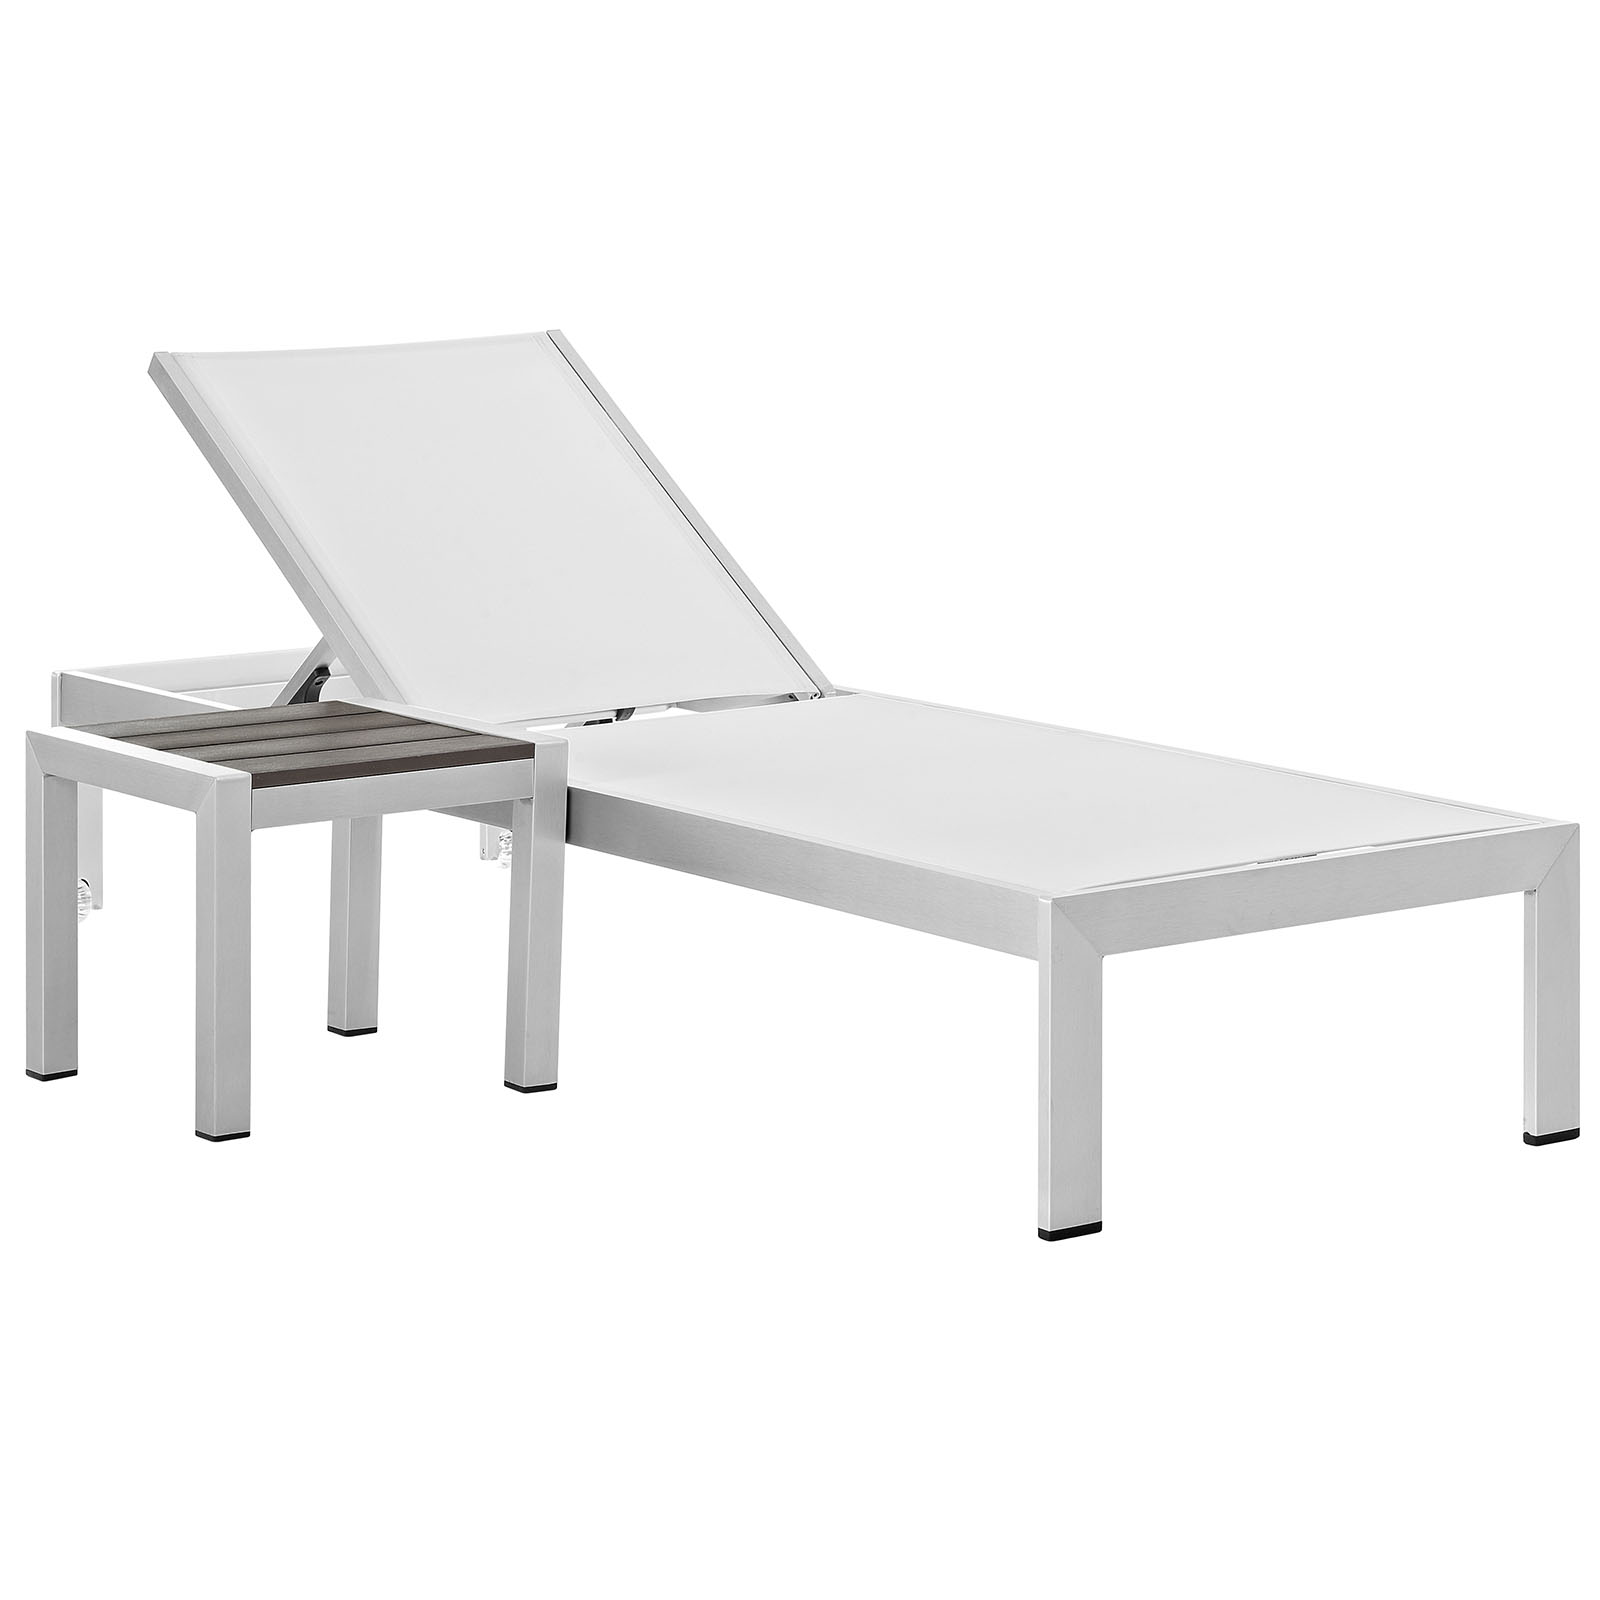 Modern Contemporary Urban Design Outdoor Patio Balcony Chaise Lounge Chair and Side Table set, White, Aluminum - image 1 of 7